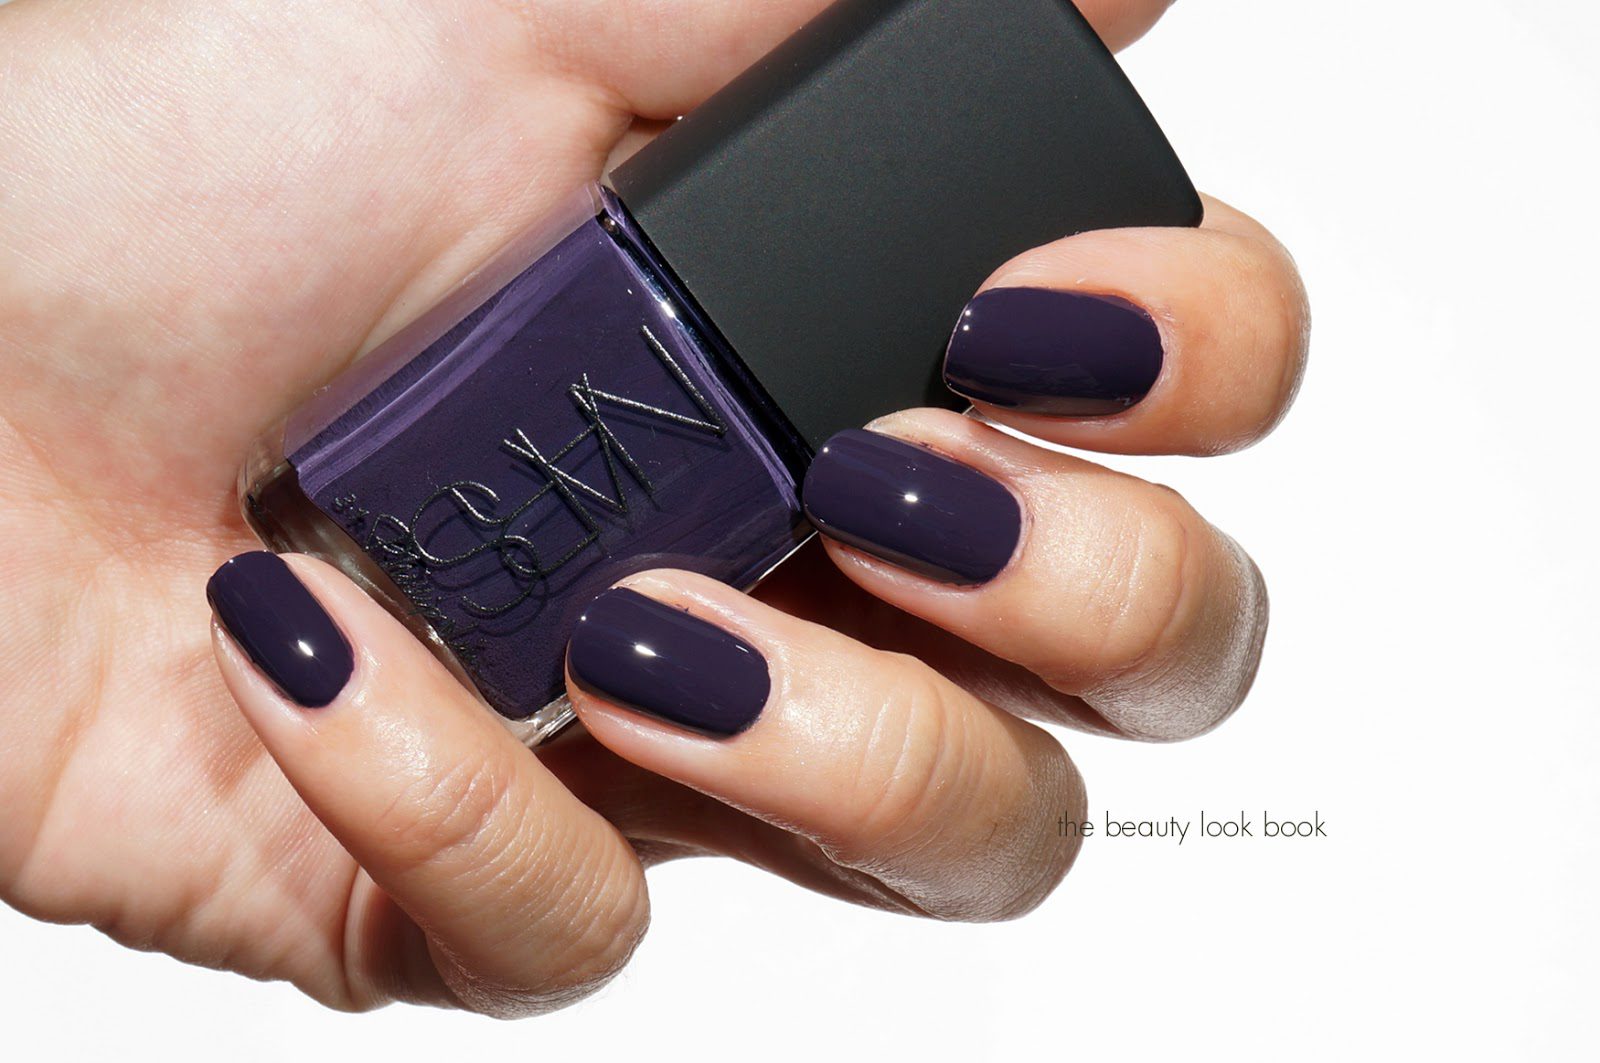  Phillip Lim for NARS | Crossroads, Other Side and Insidious Nail Polish  - The Beauty Look Book